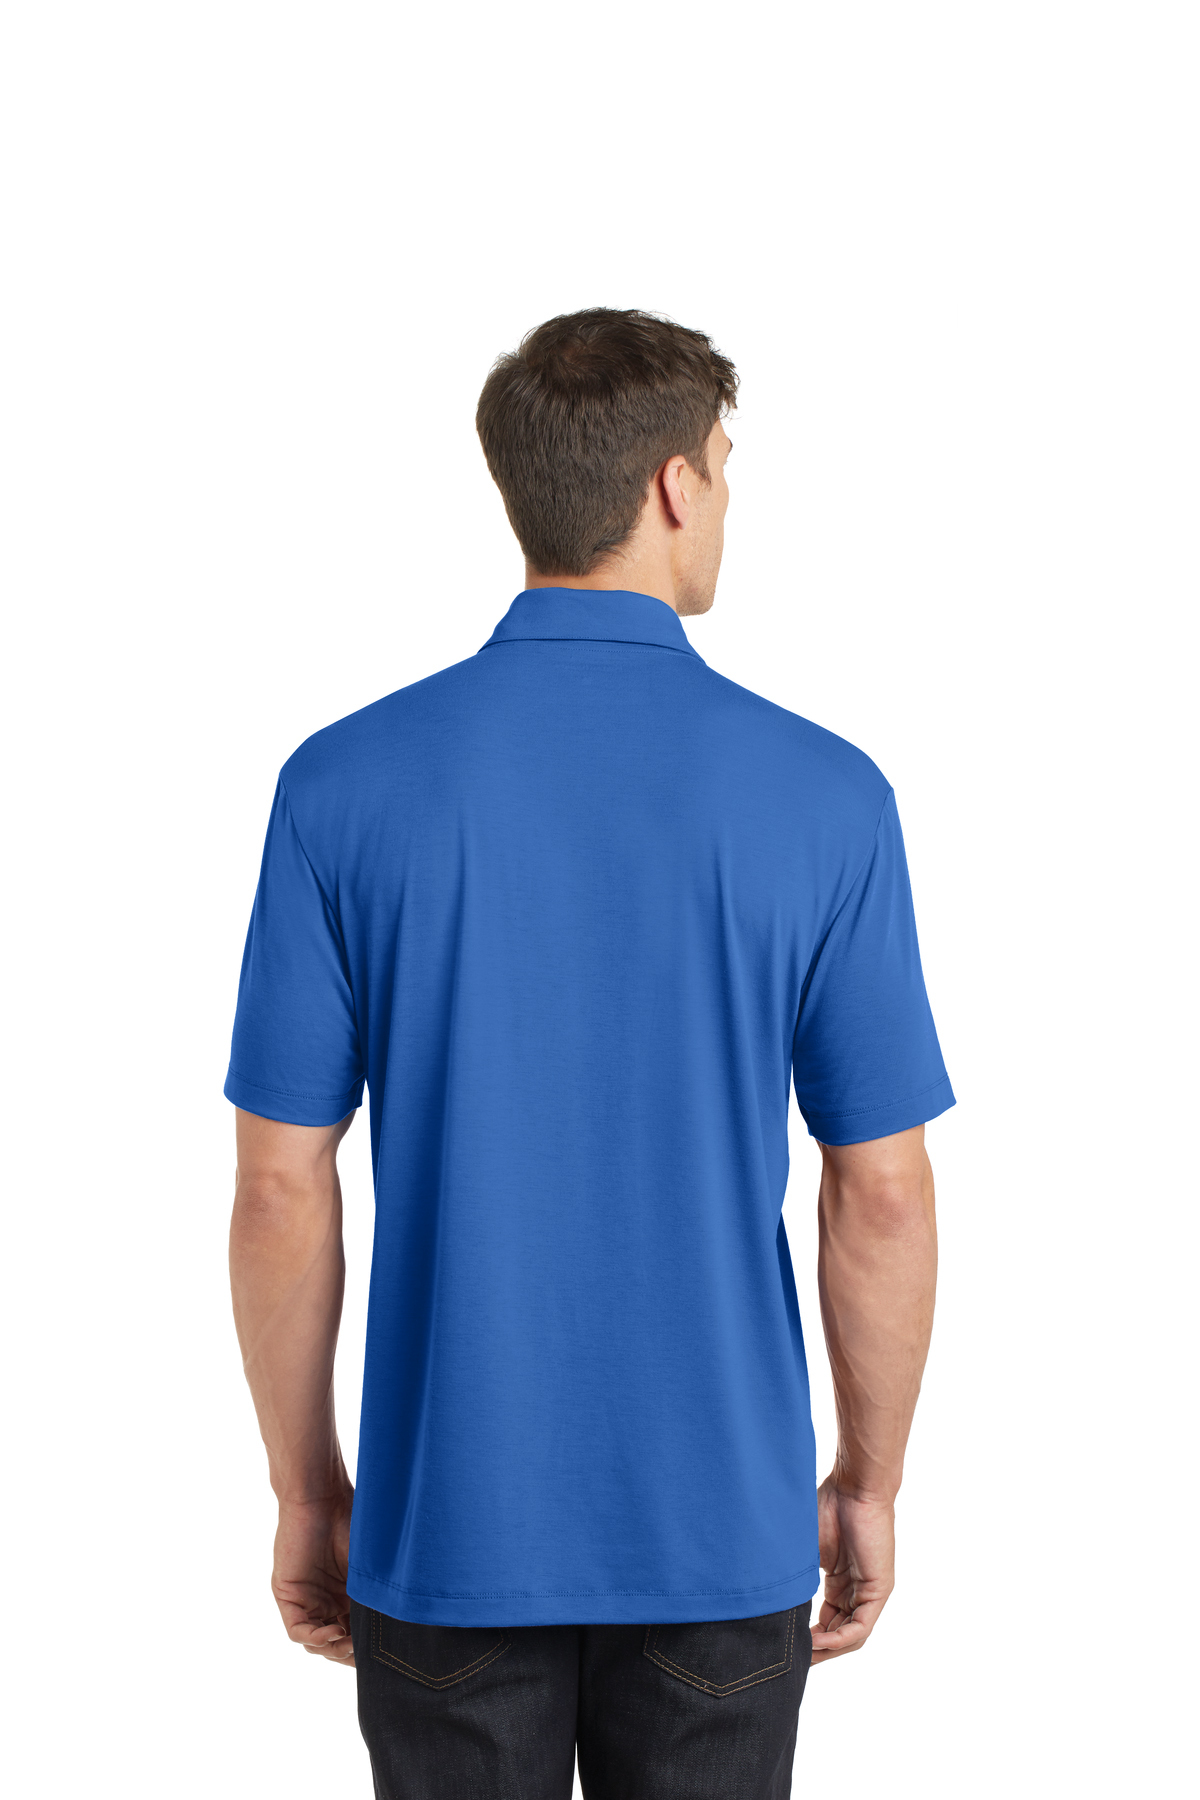 Port Authority ® Cotton Touch ™ Performance Polo | Product | Port Authority